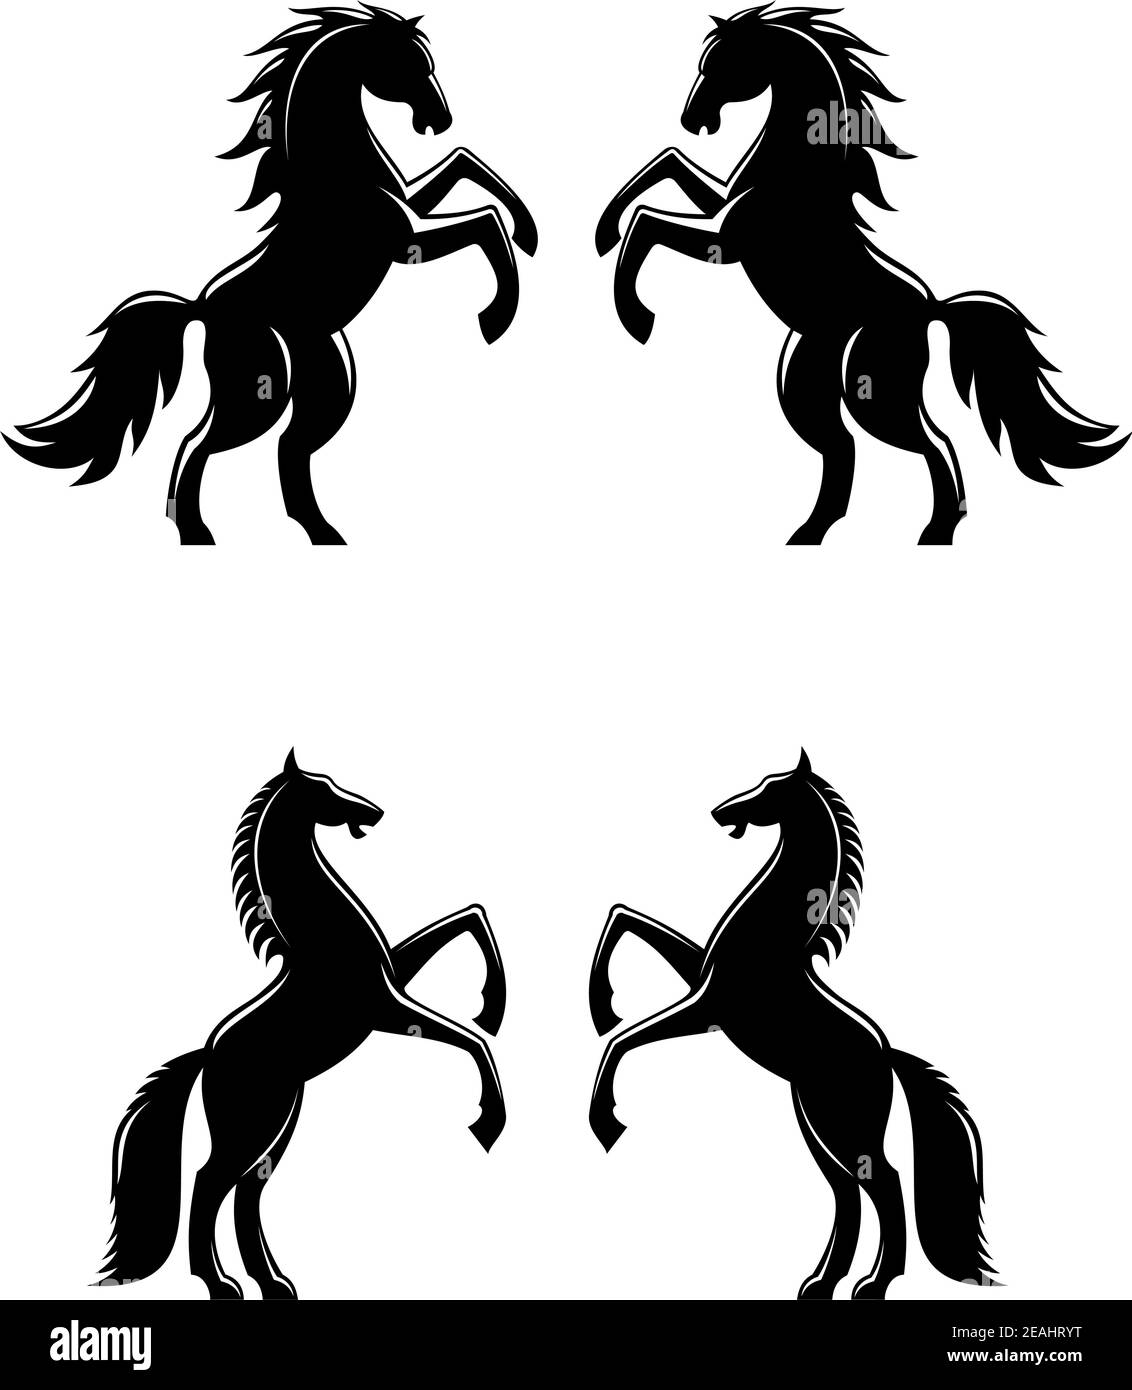 Two rearing up horses silhouettes in black for heraldry design Stock Vector